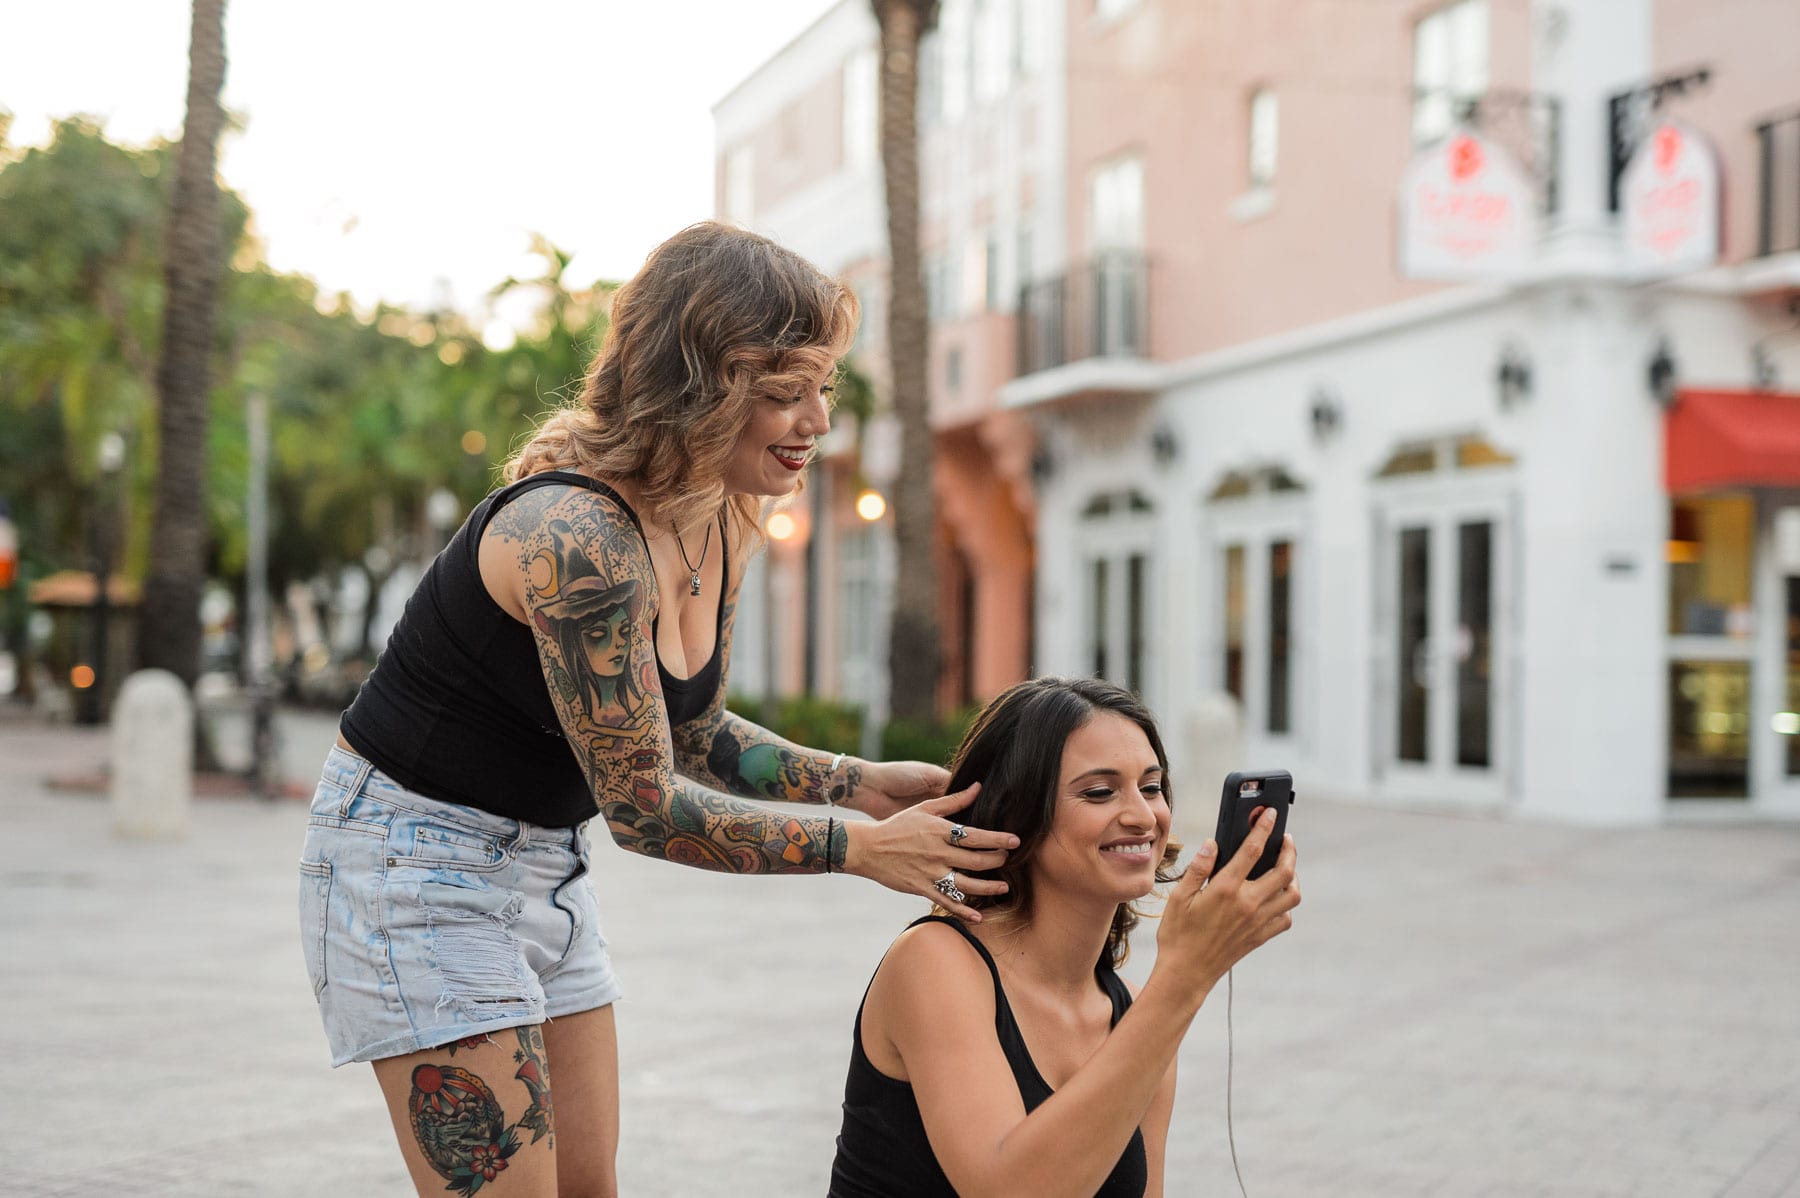 Tattooed makeup artist working on a model who is looking at her cell phone smiling along with the makeup artist